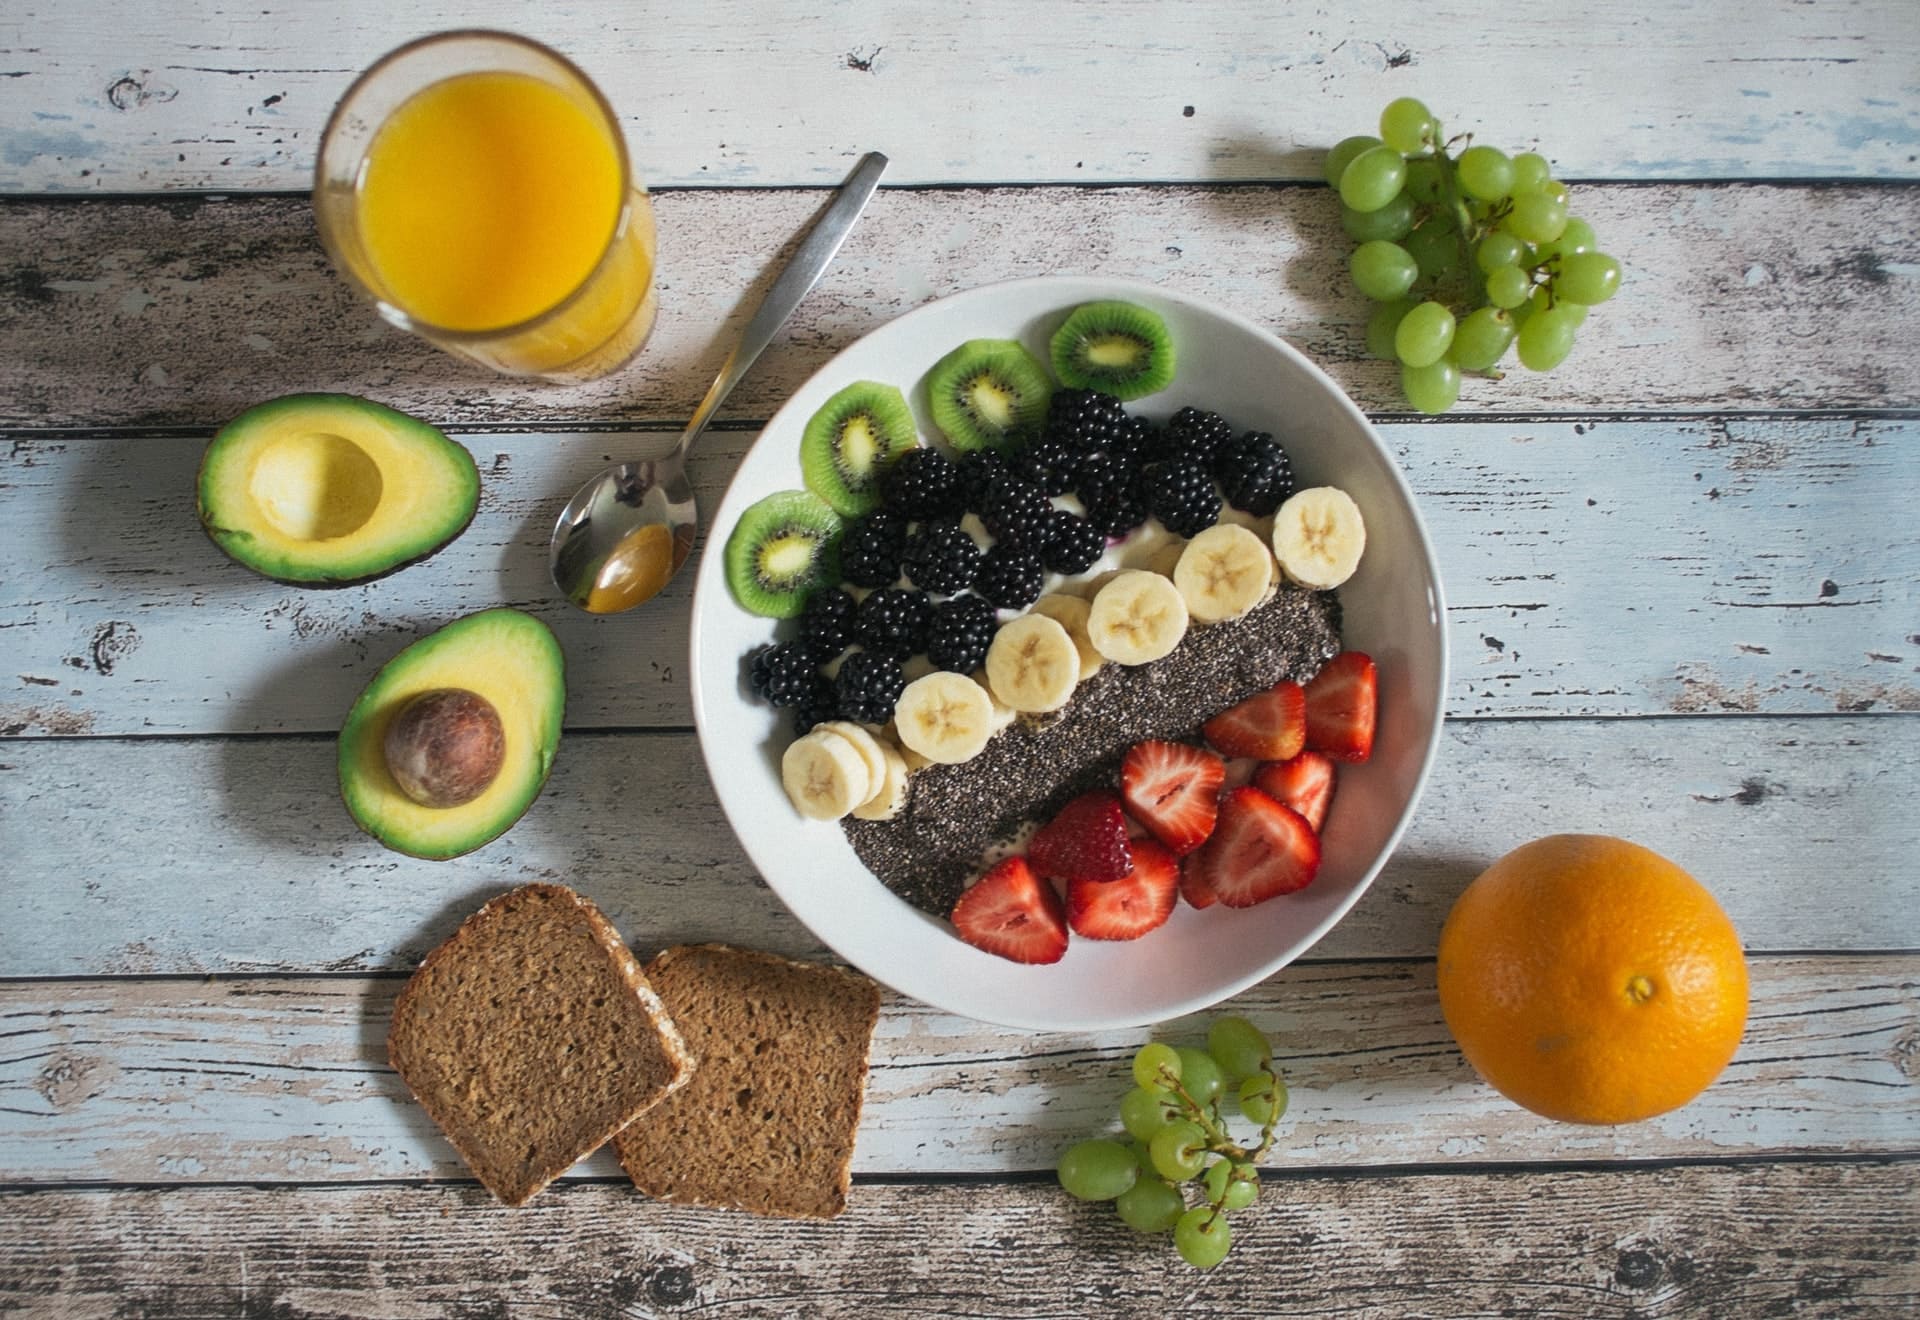 5 healthy snack ideas for athletes